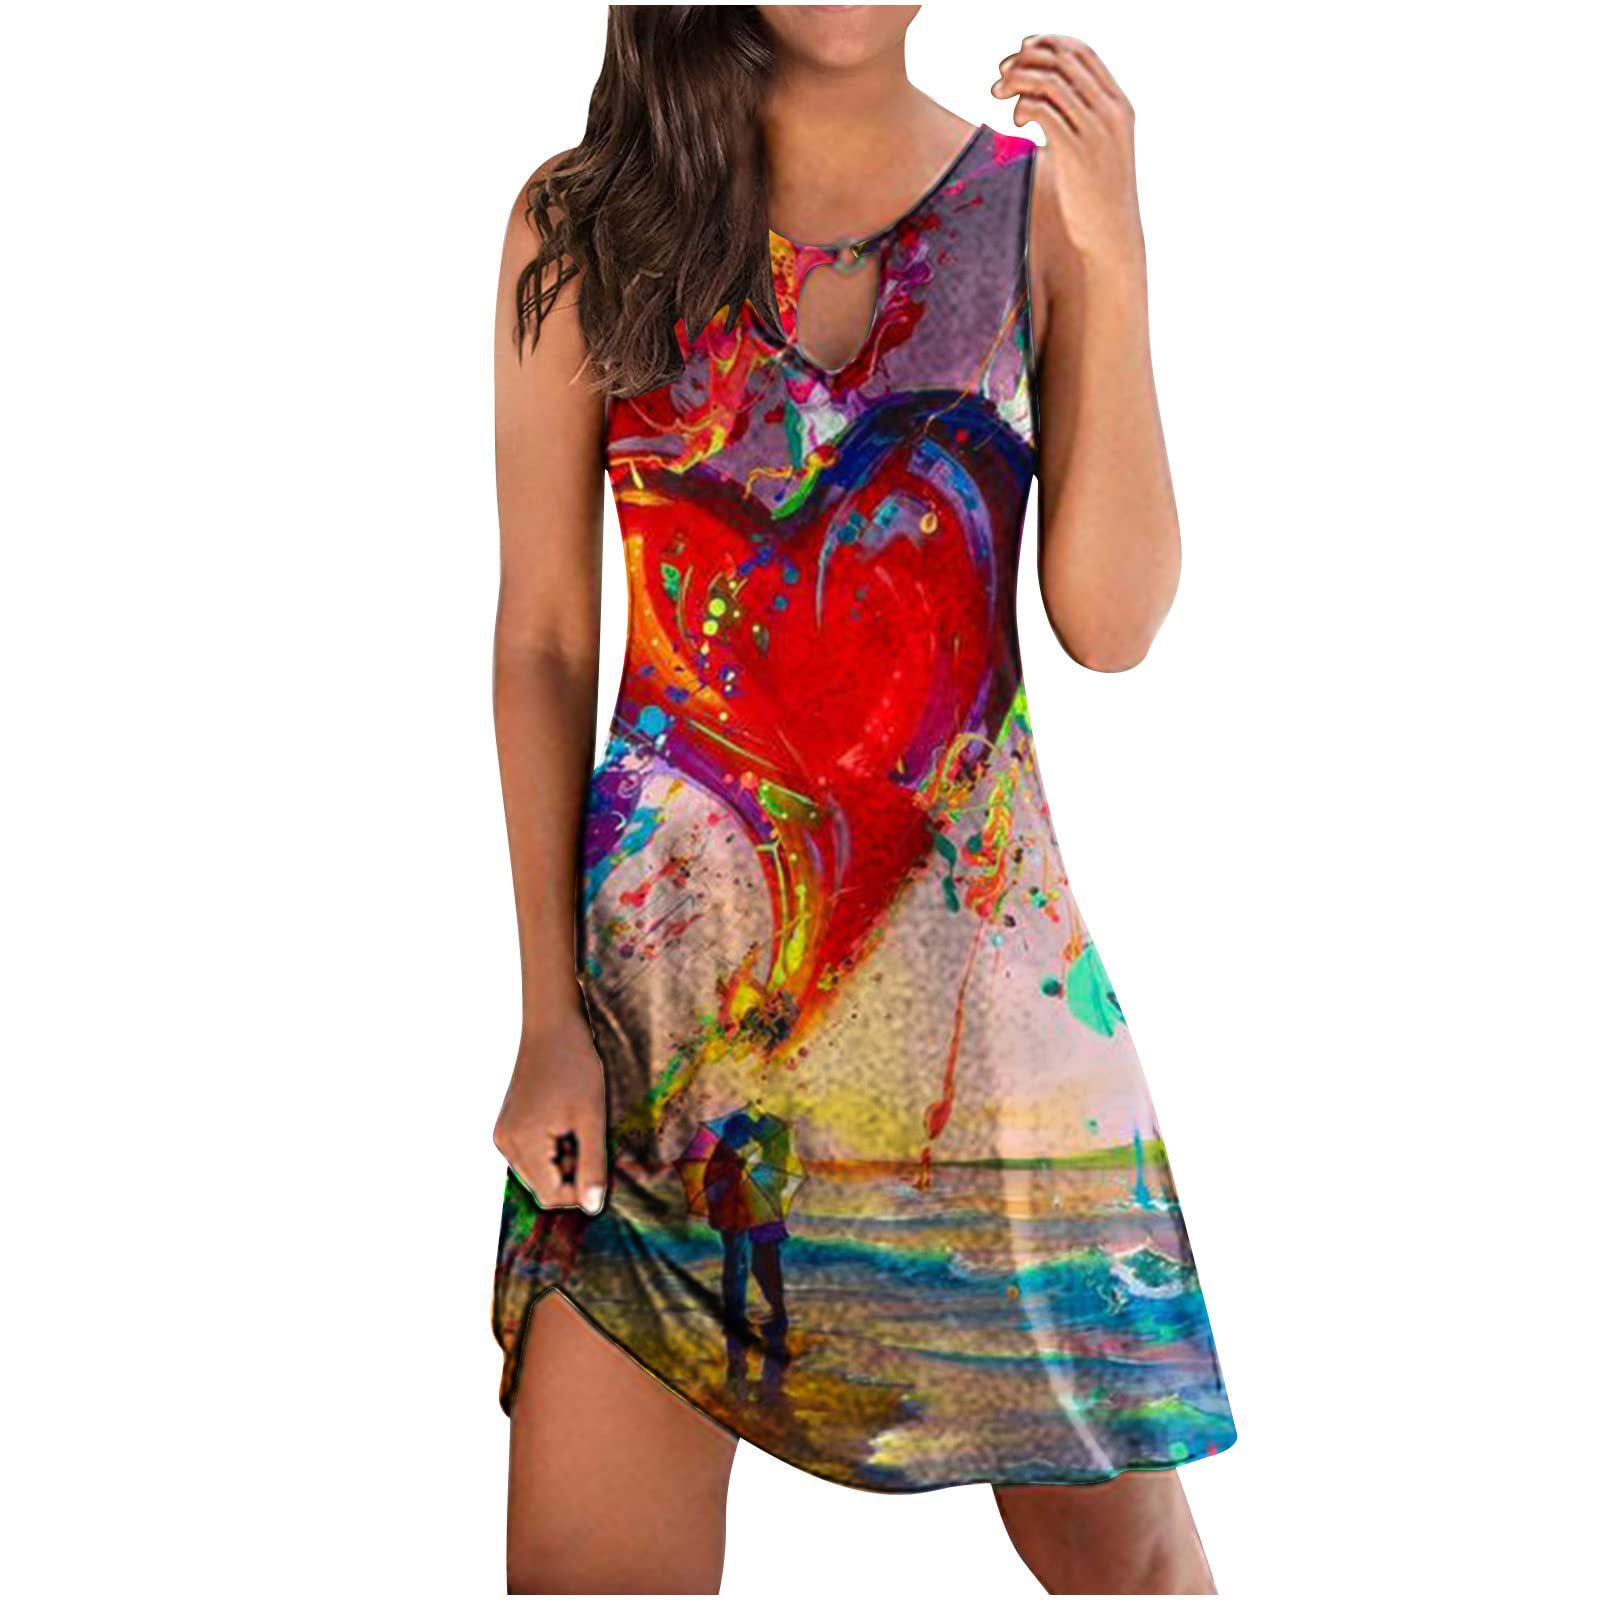 2022 European and American New Independent Station Hot Selling Bohemian round Neck Sleeveless Retro Printed Mini Beach Dress